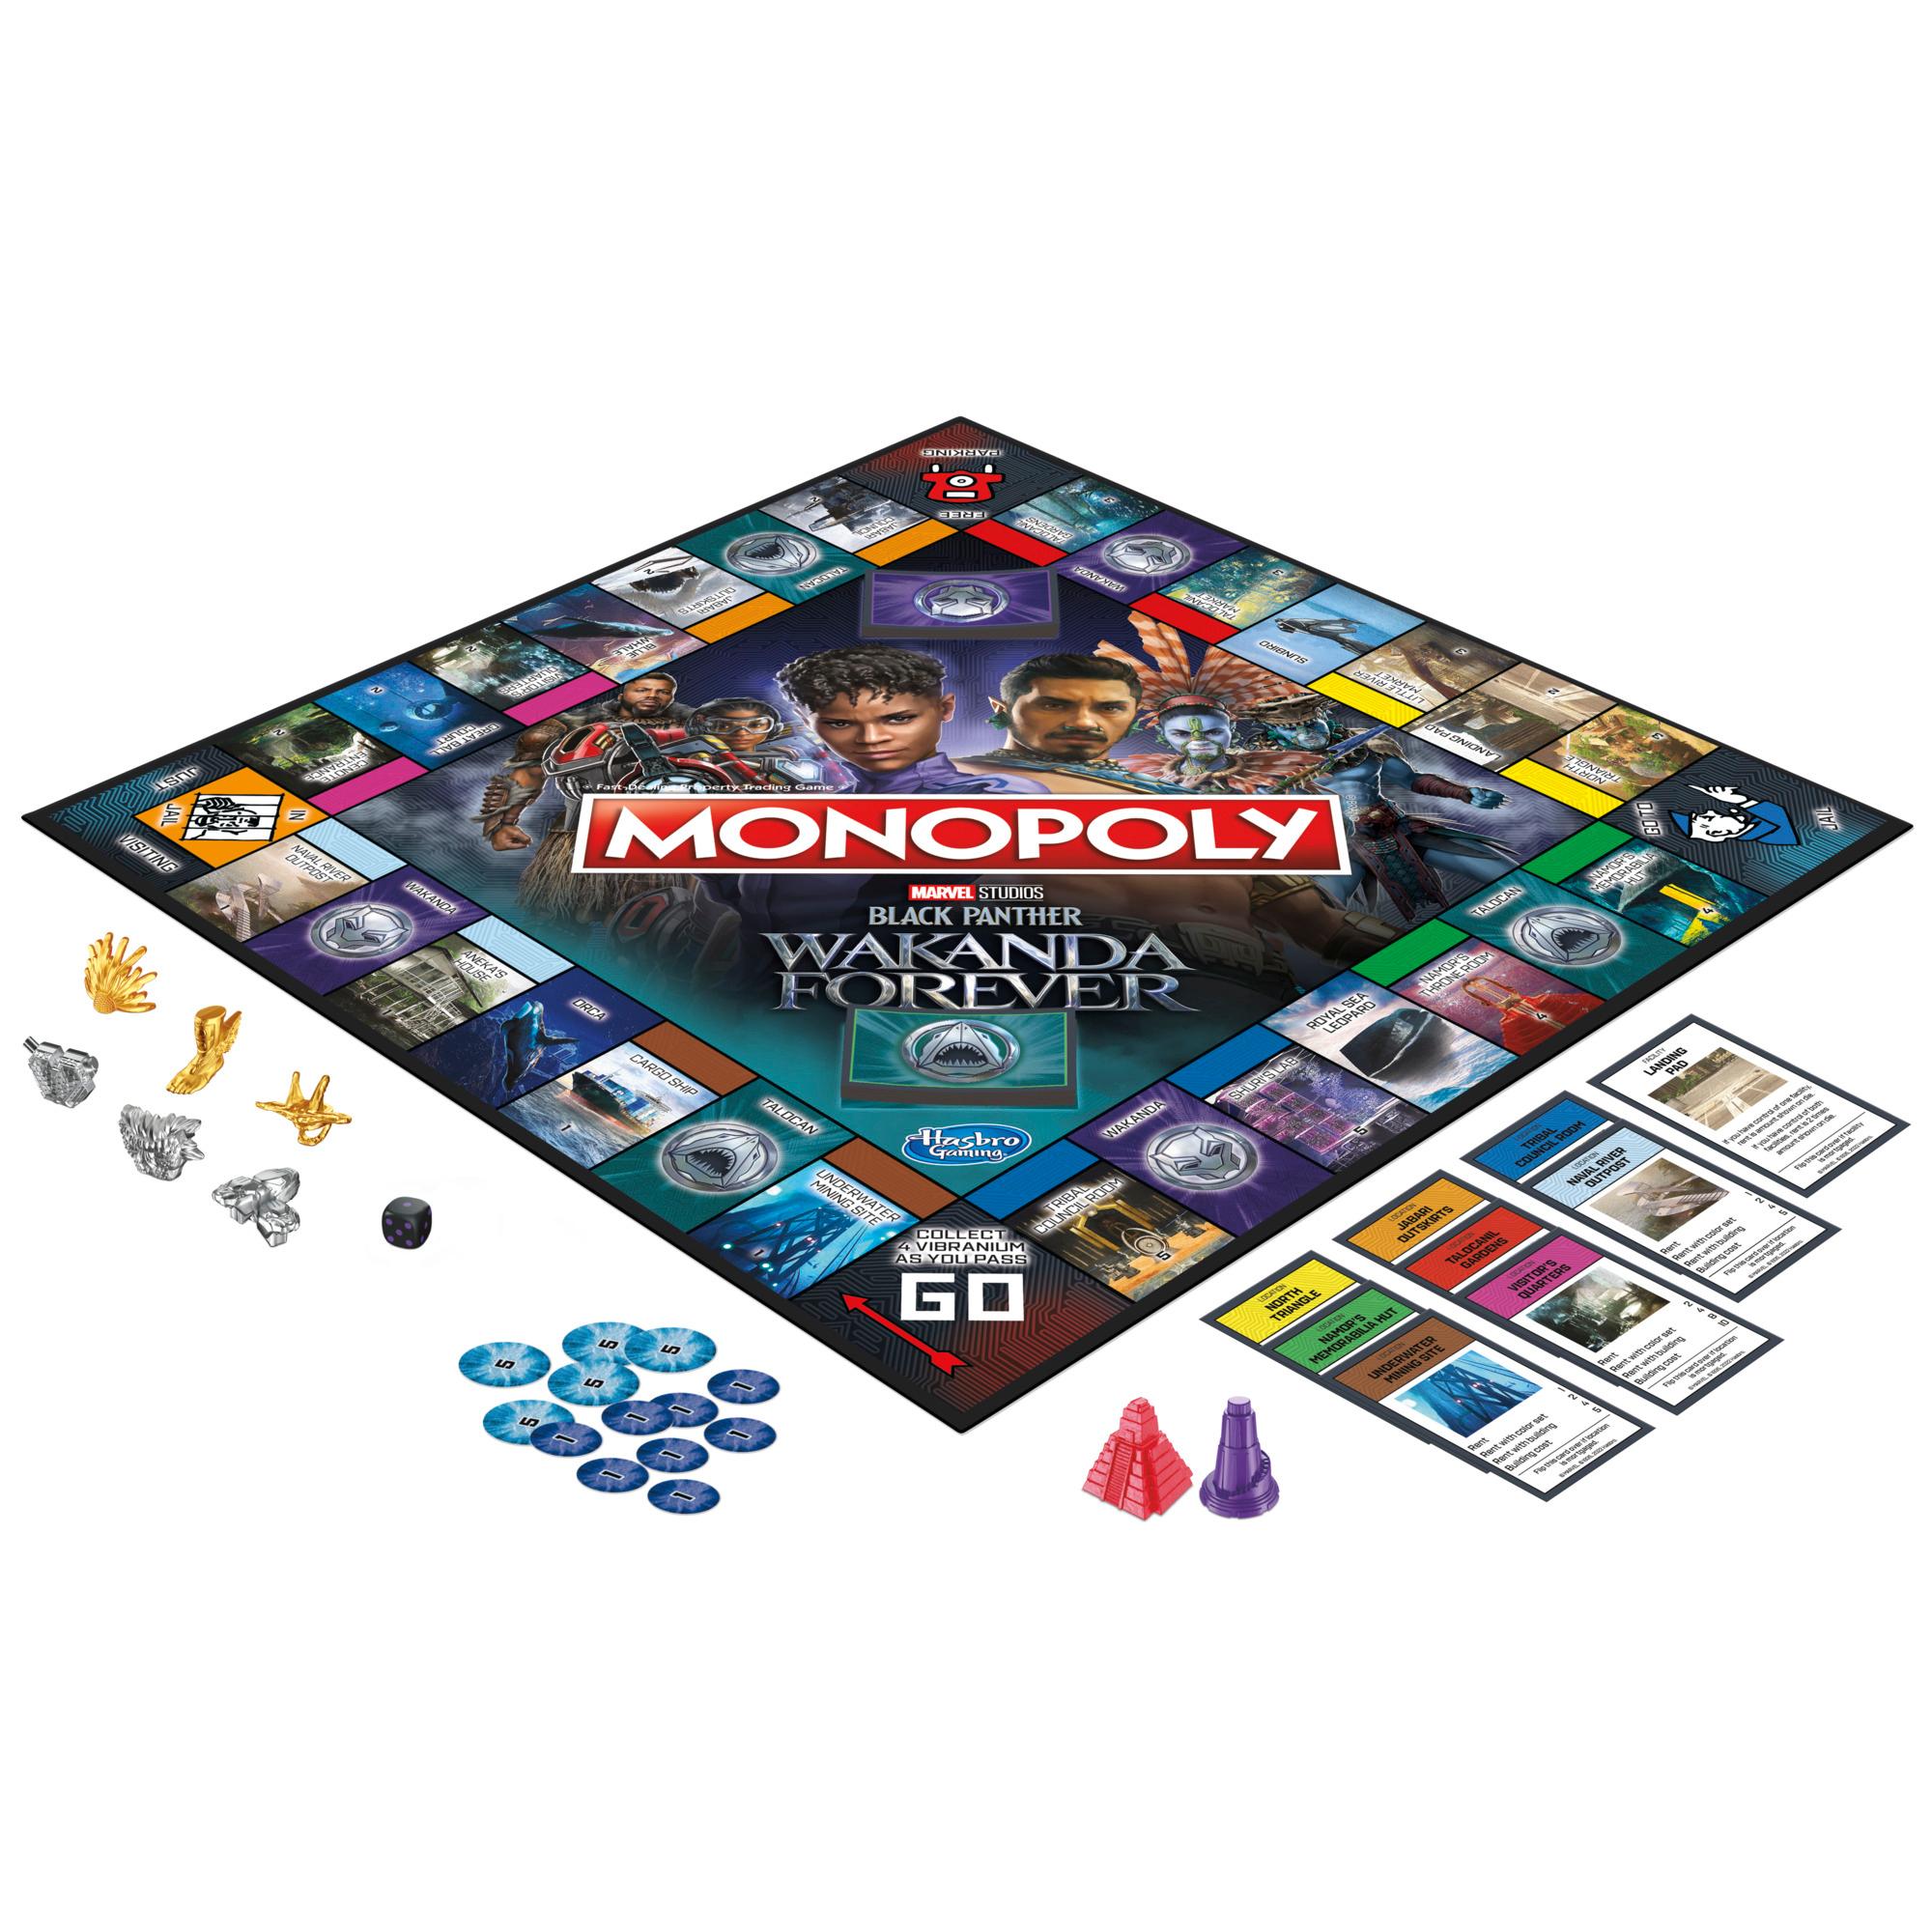 Black Panther Wakanda Forever Monopoly – Little shop of nerdy goods